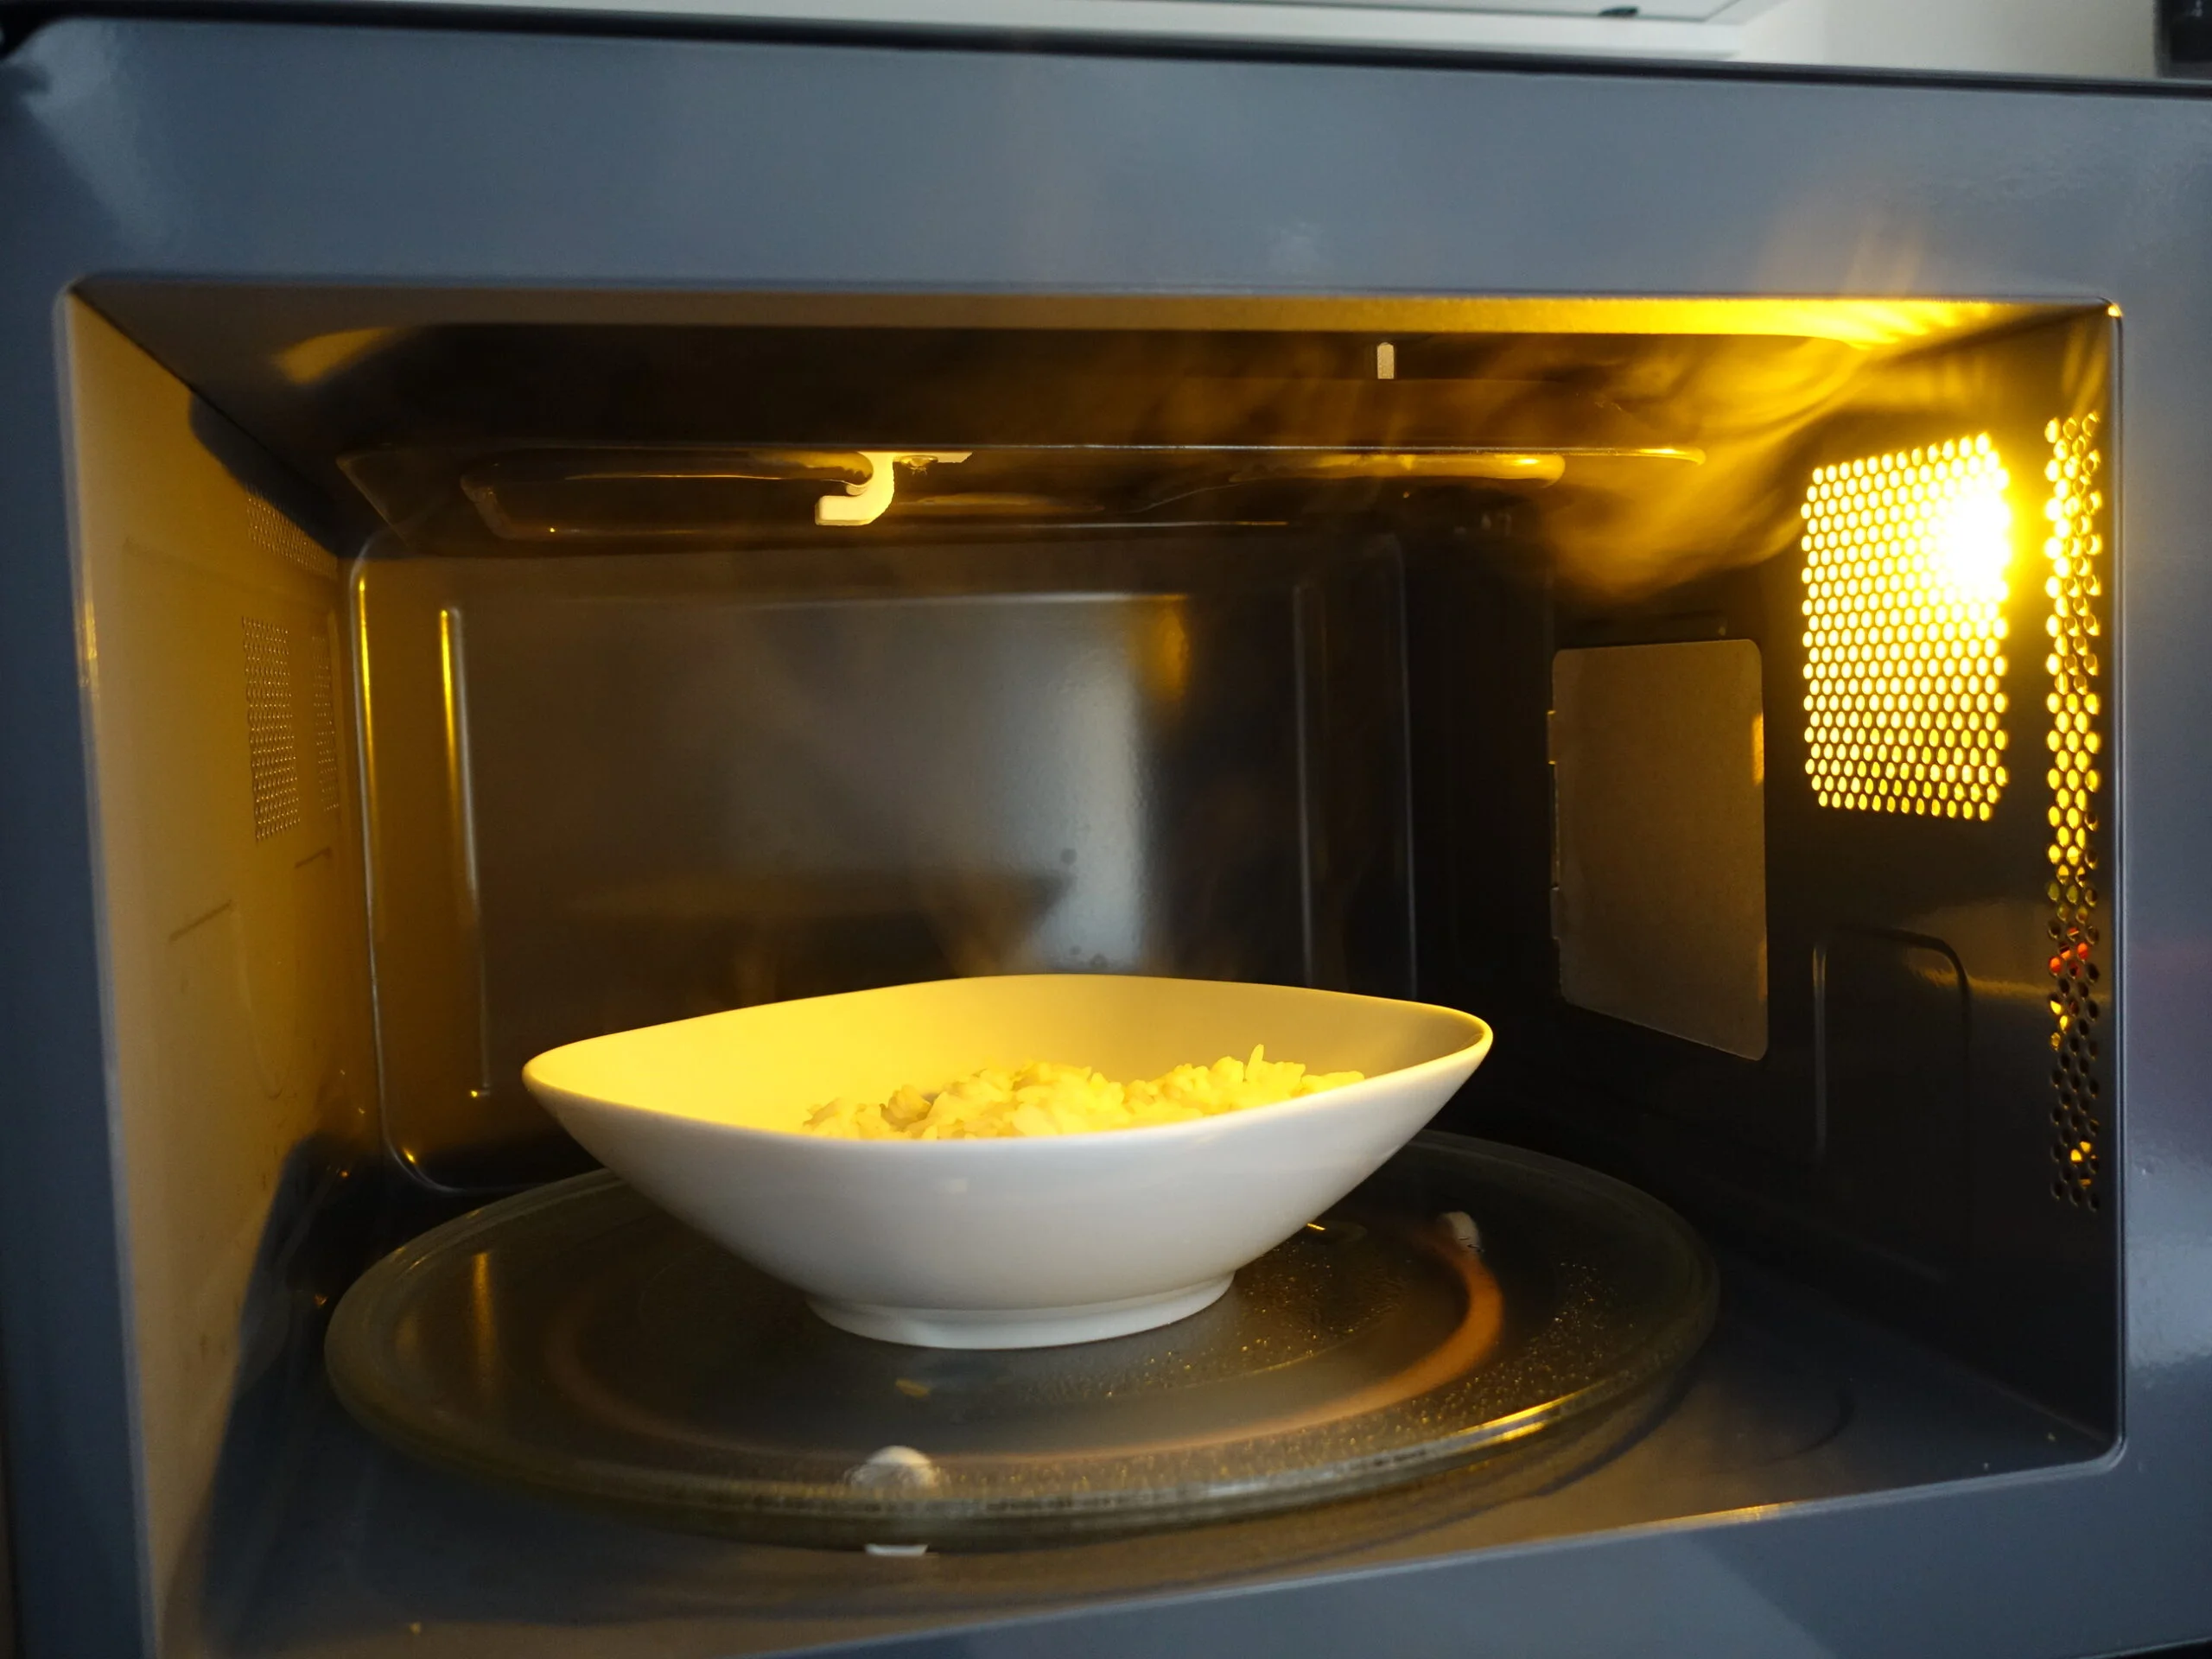 What Happens if a Microwave Runs With the Door Open